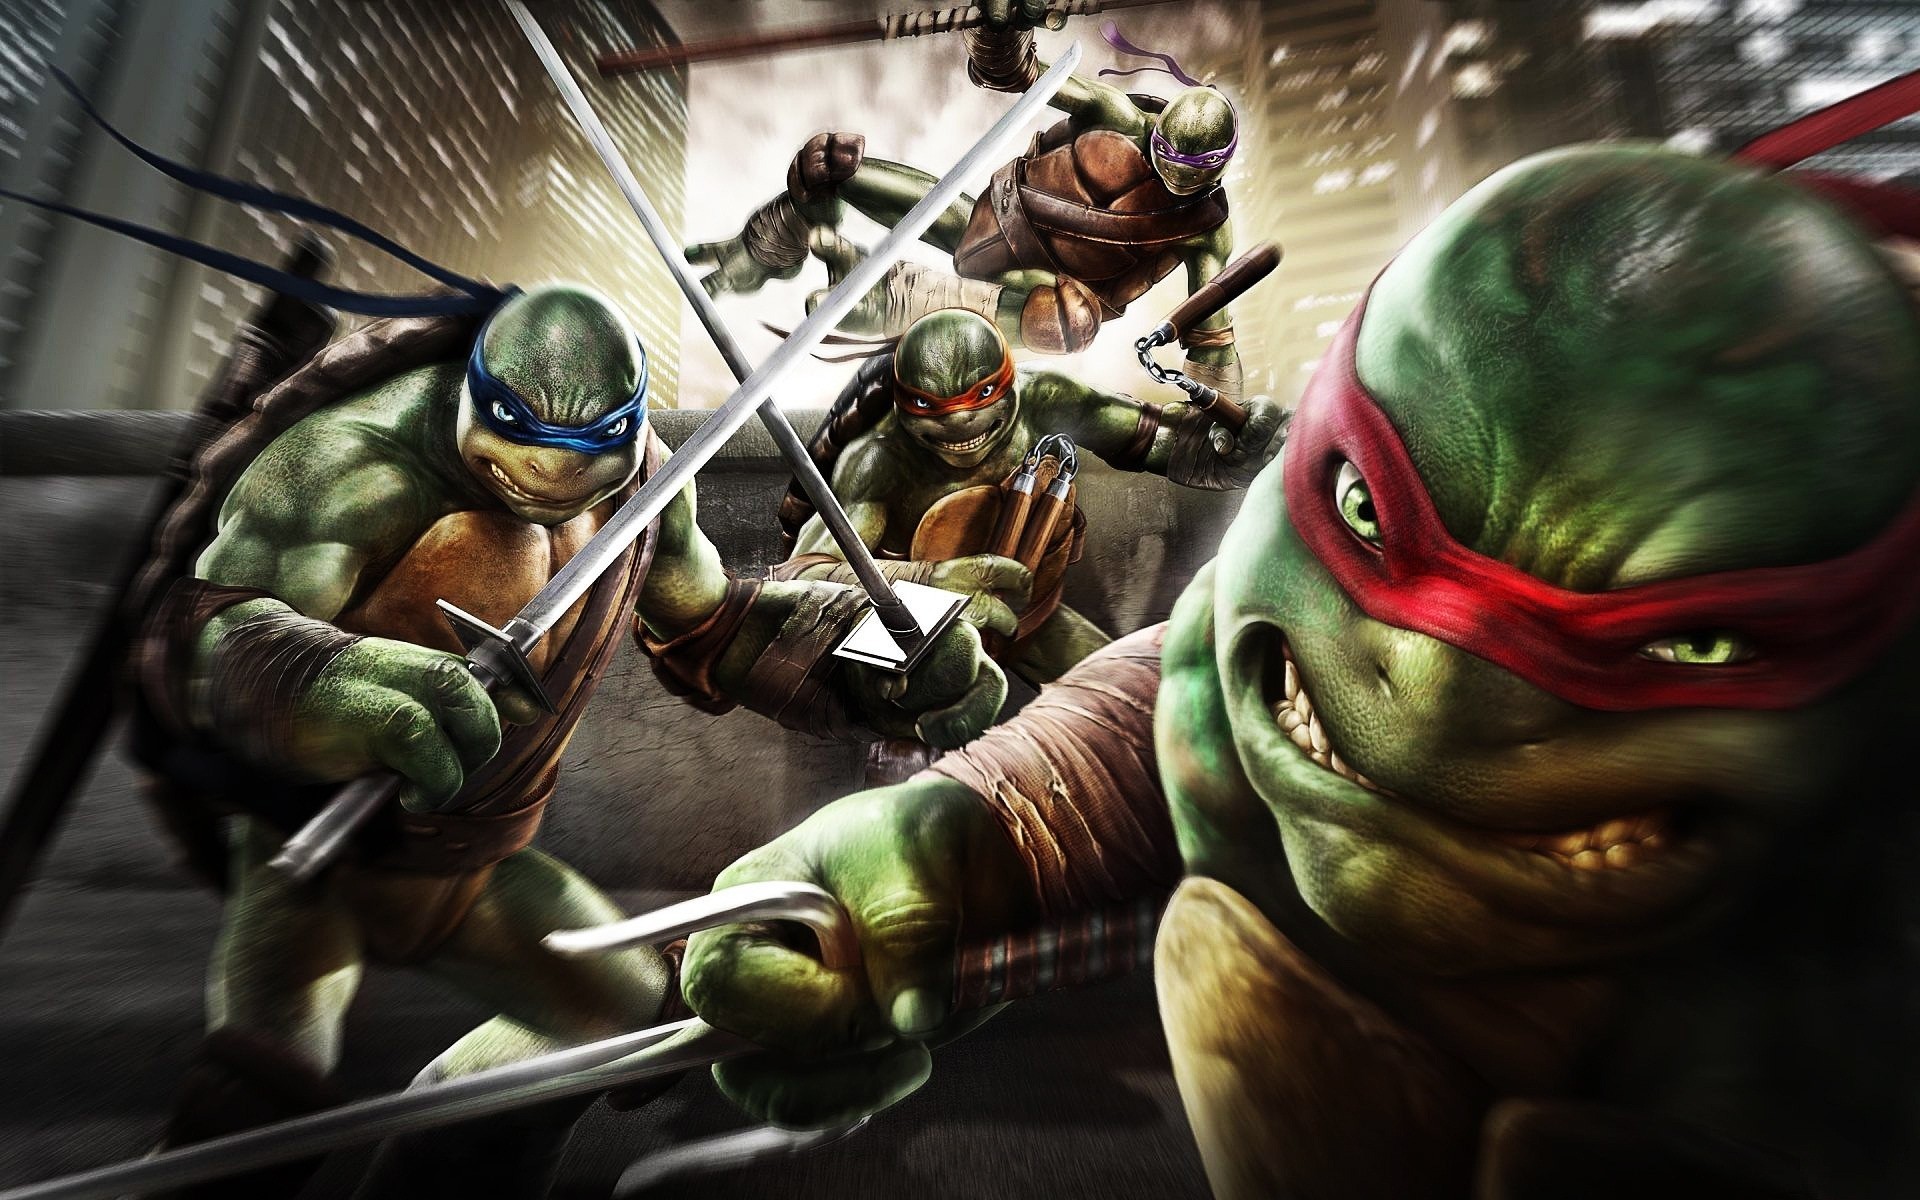 1920x1200 Teenage Mutant Ninja Turtles Out Of The Shadows. iPhone wallpapers for free.